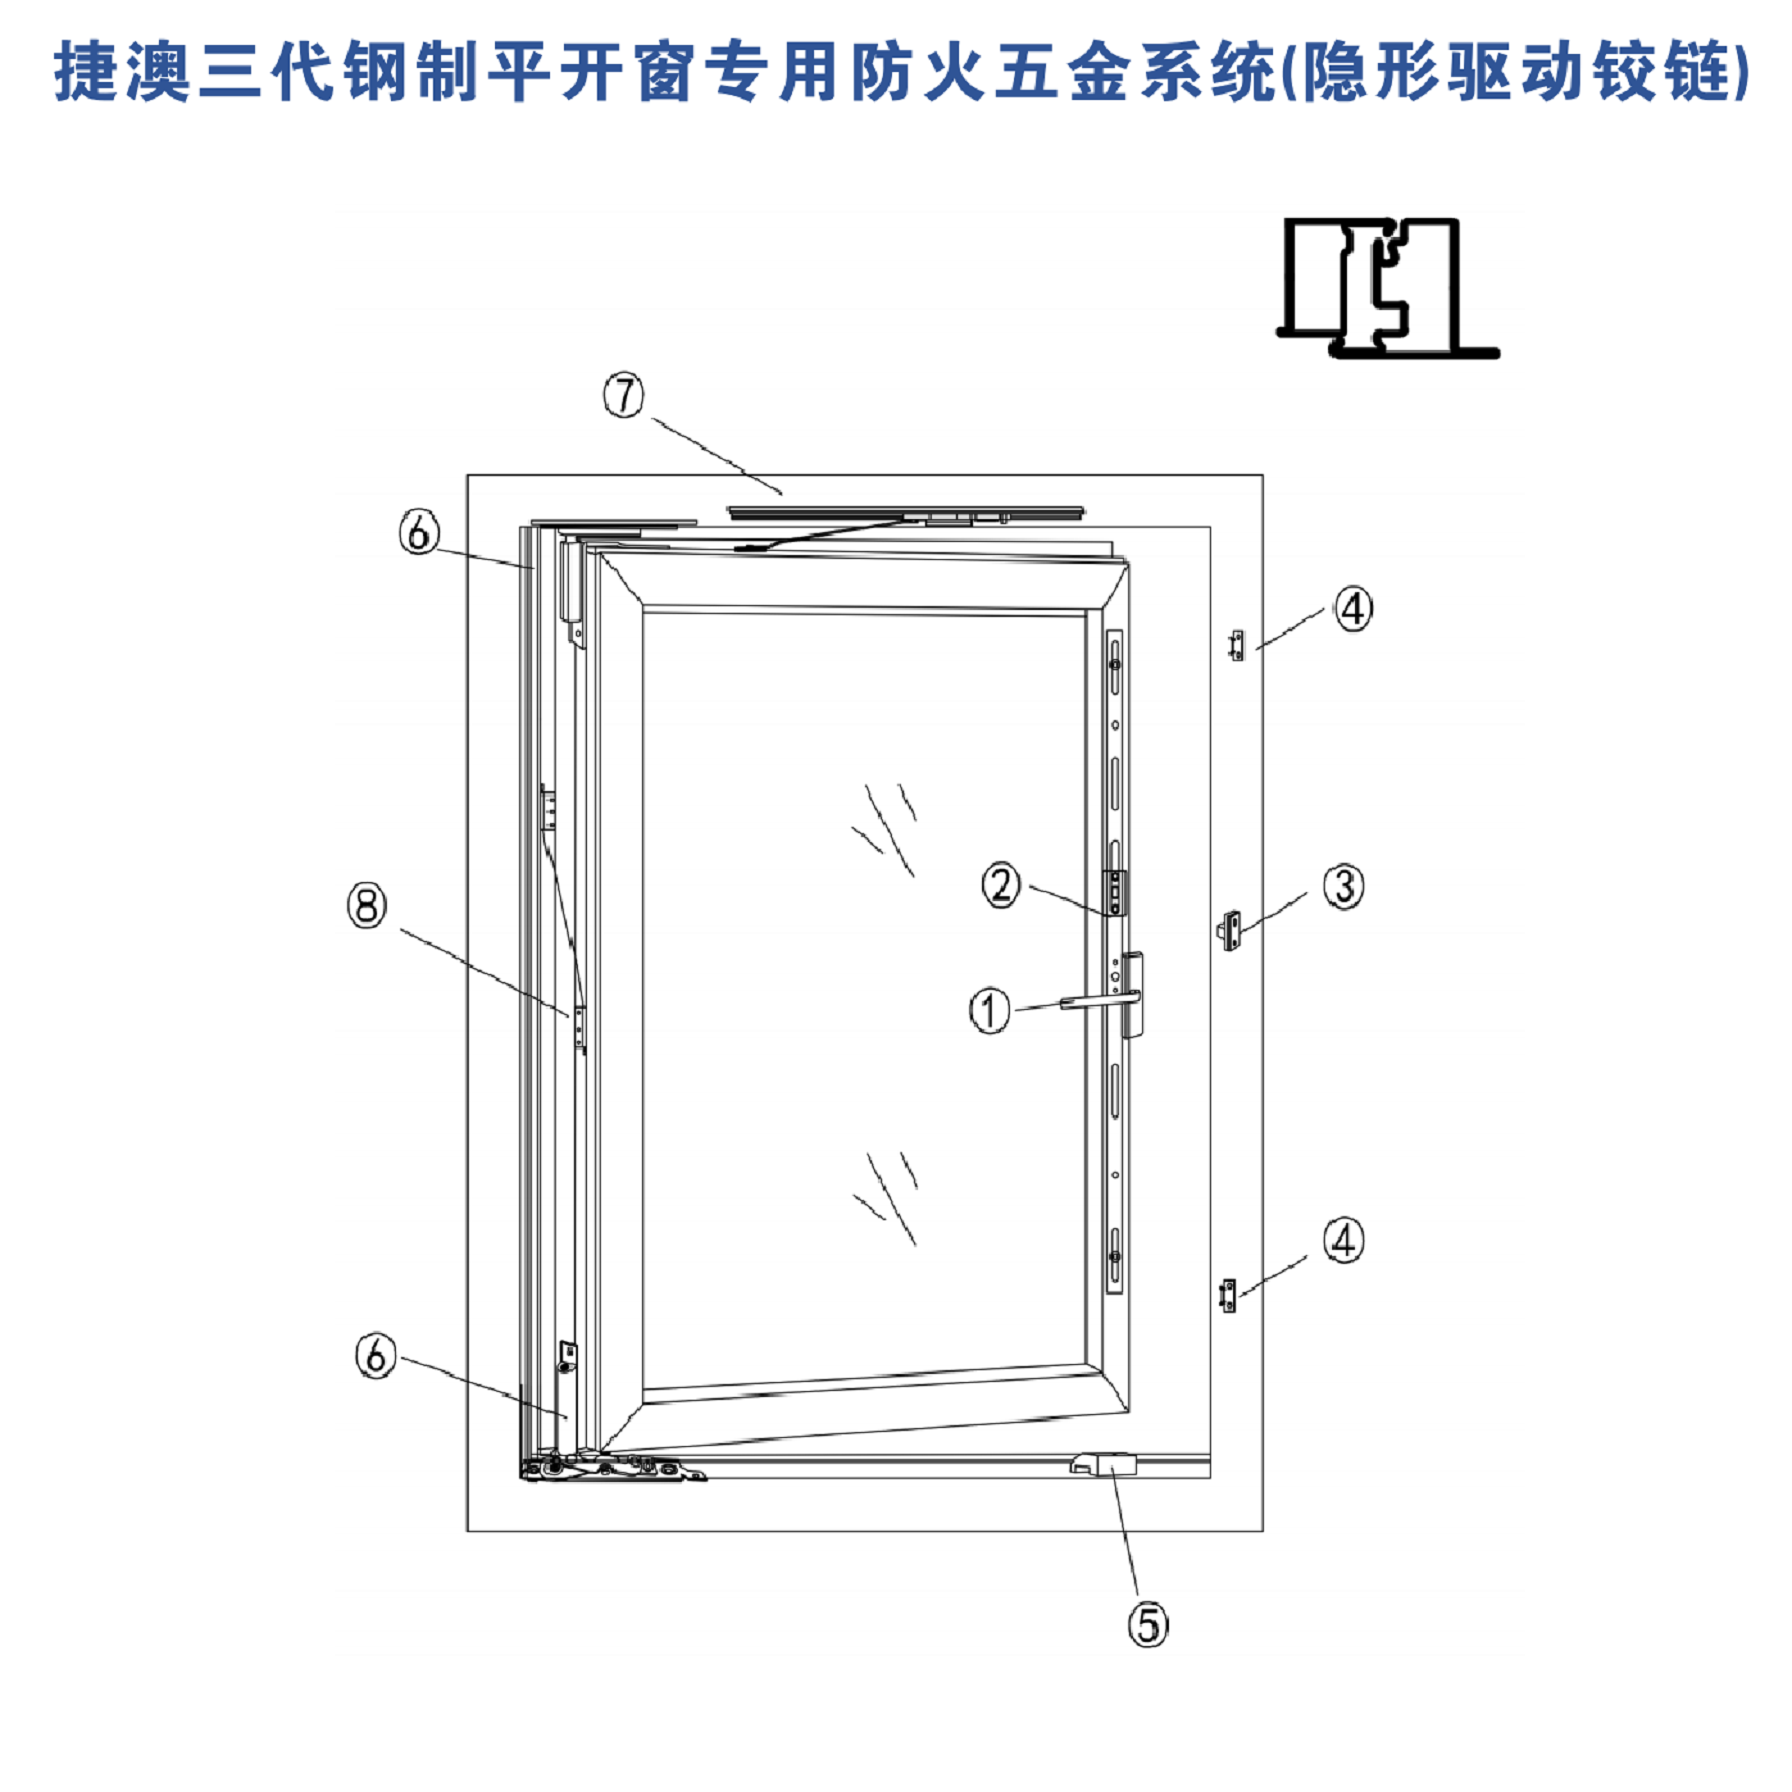 Special fireproof hardware system for Jieao steel casement window (invisible driving hinge)